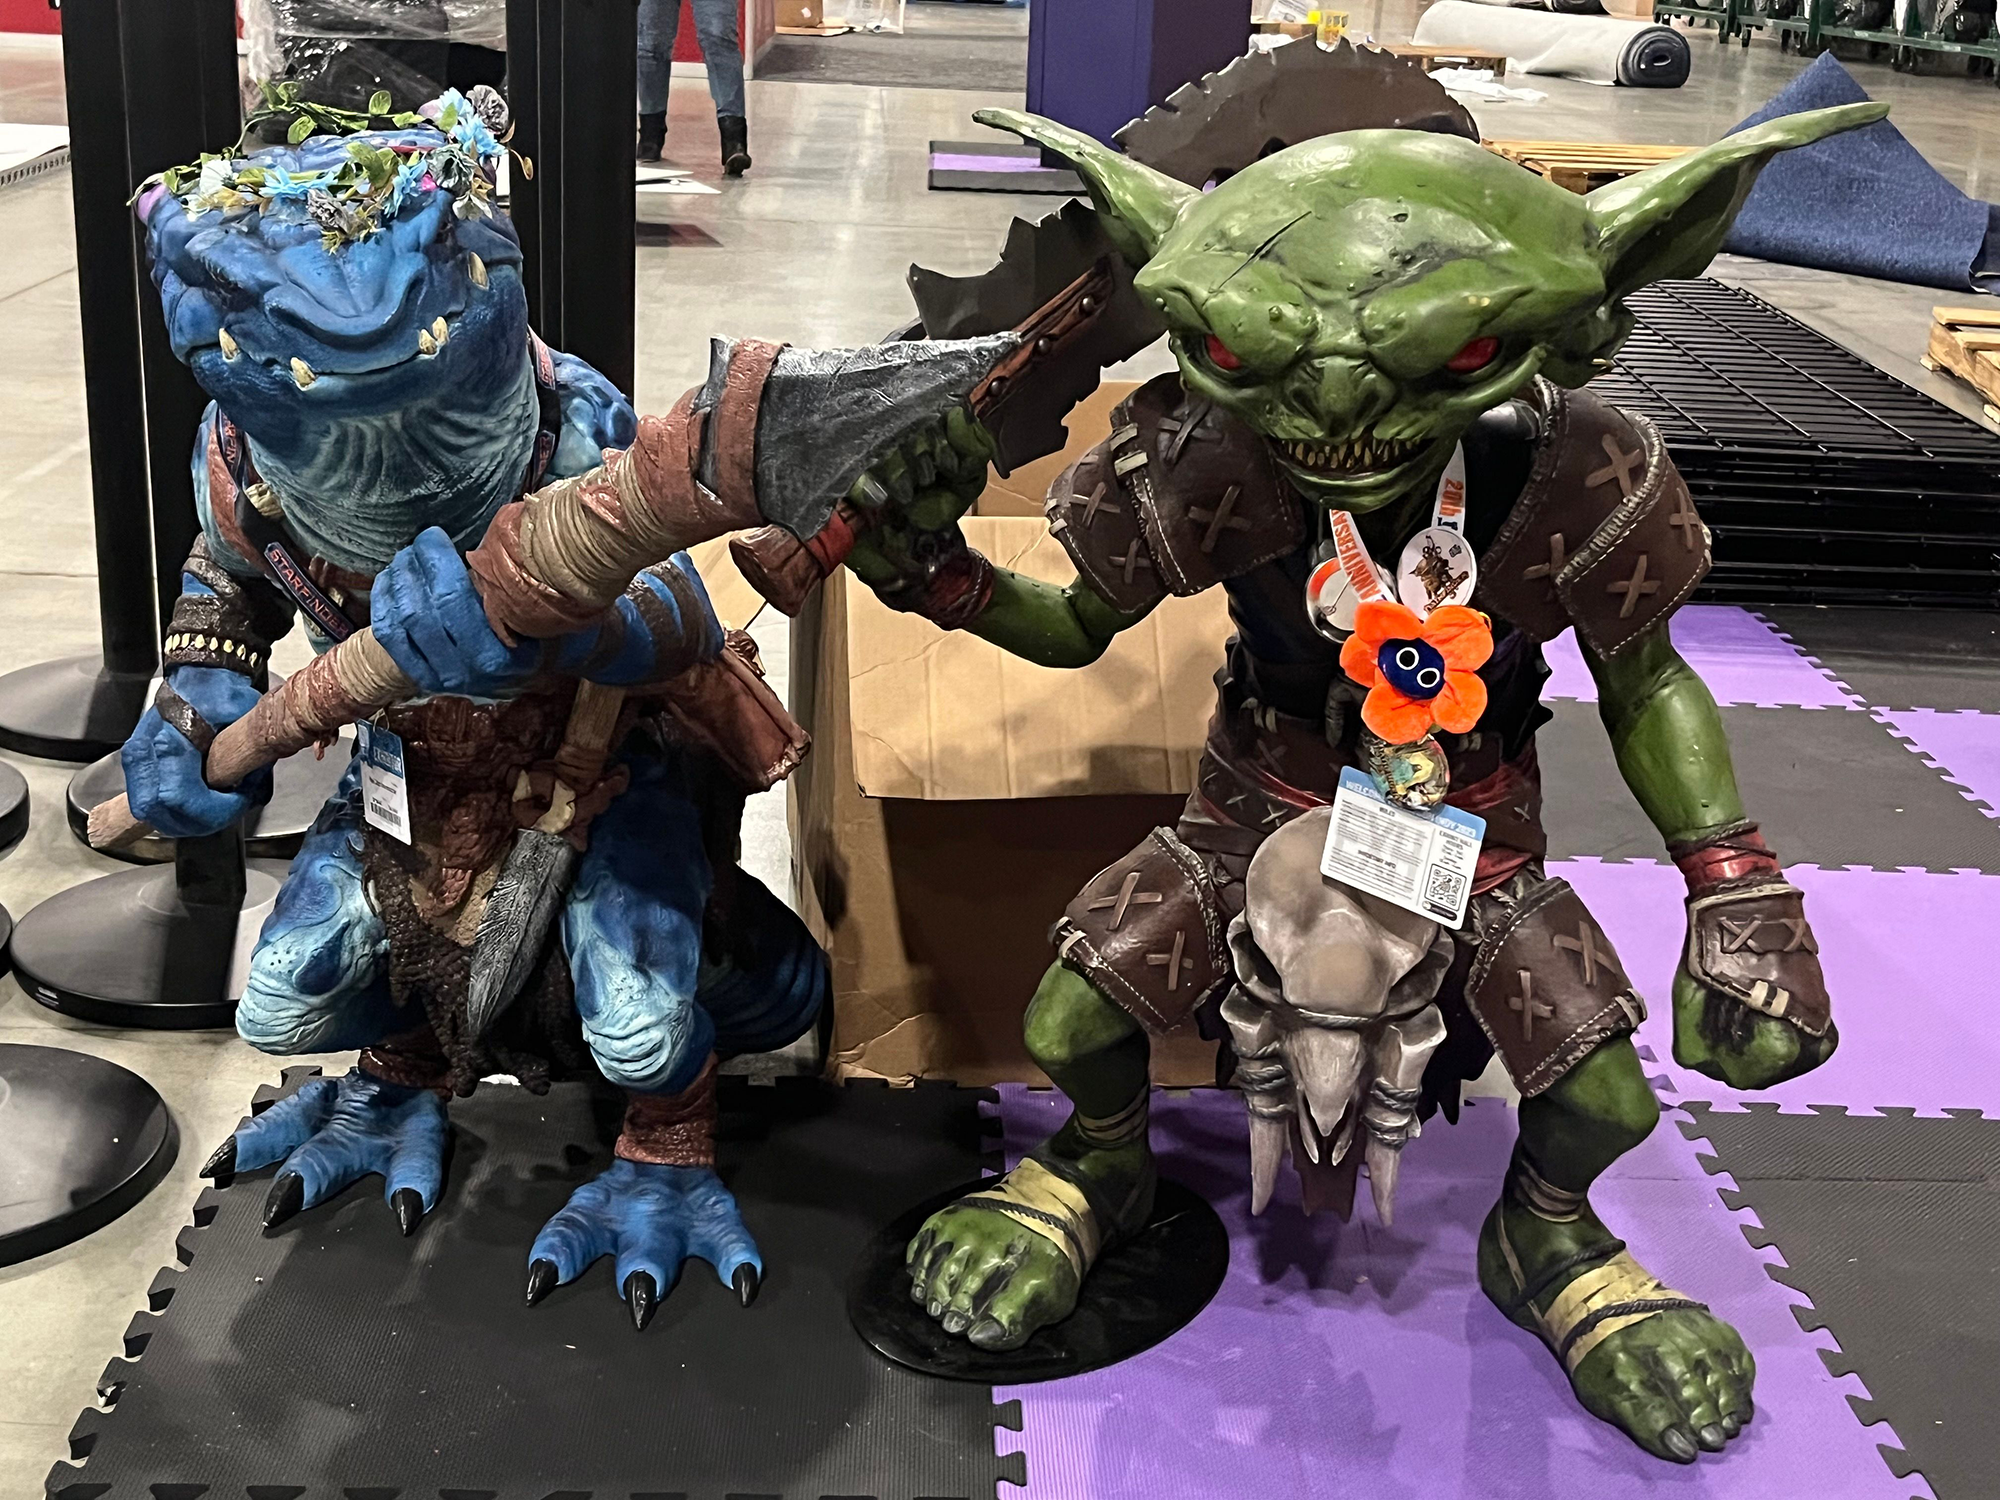 Life size foam figures of a blue Kobold holding a spear and a Goblin holding a large knife